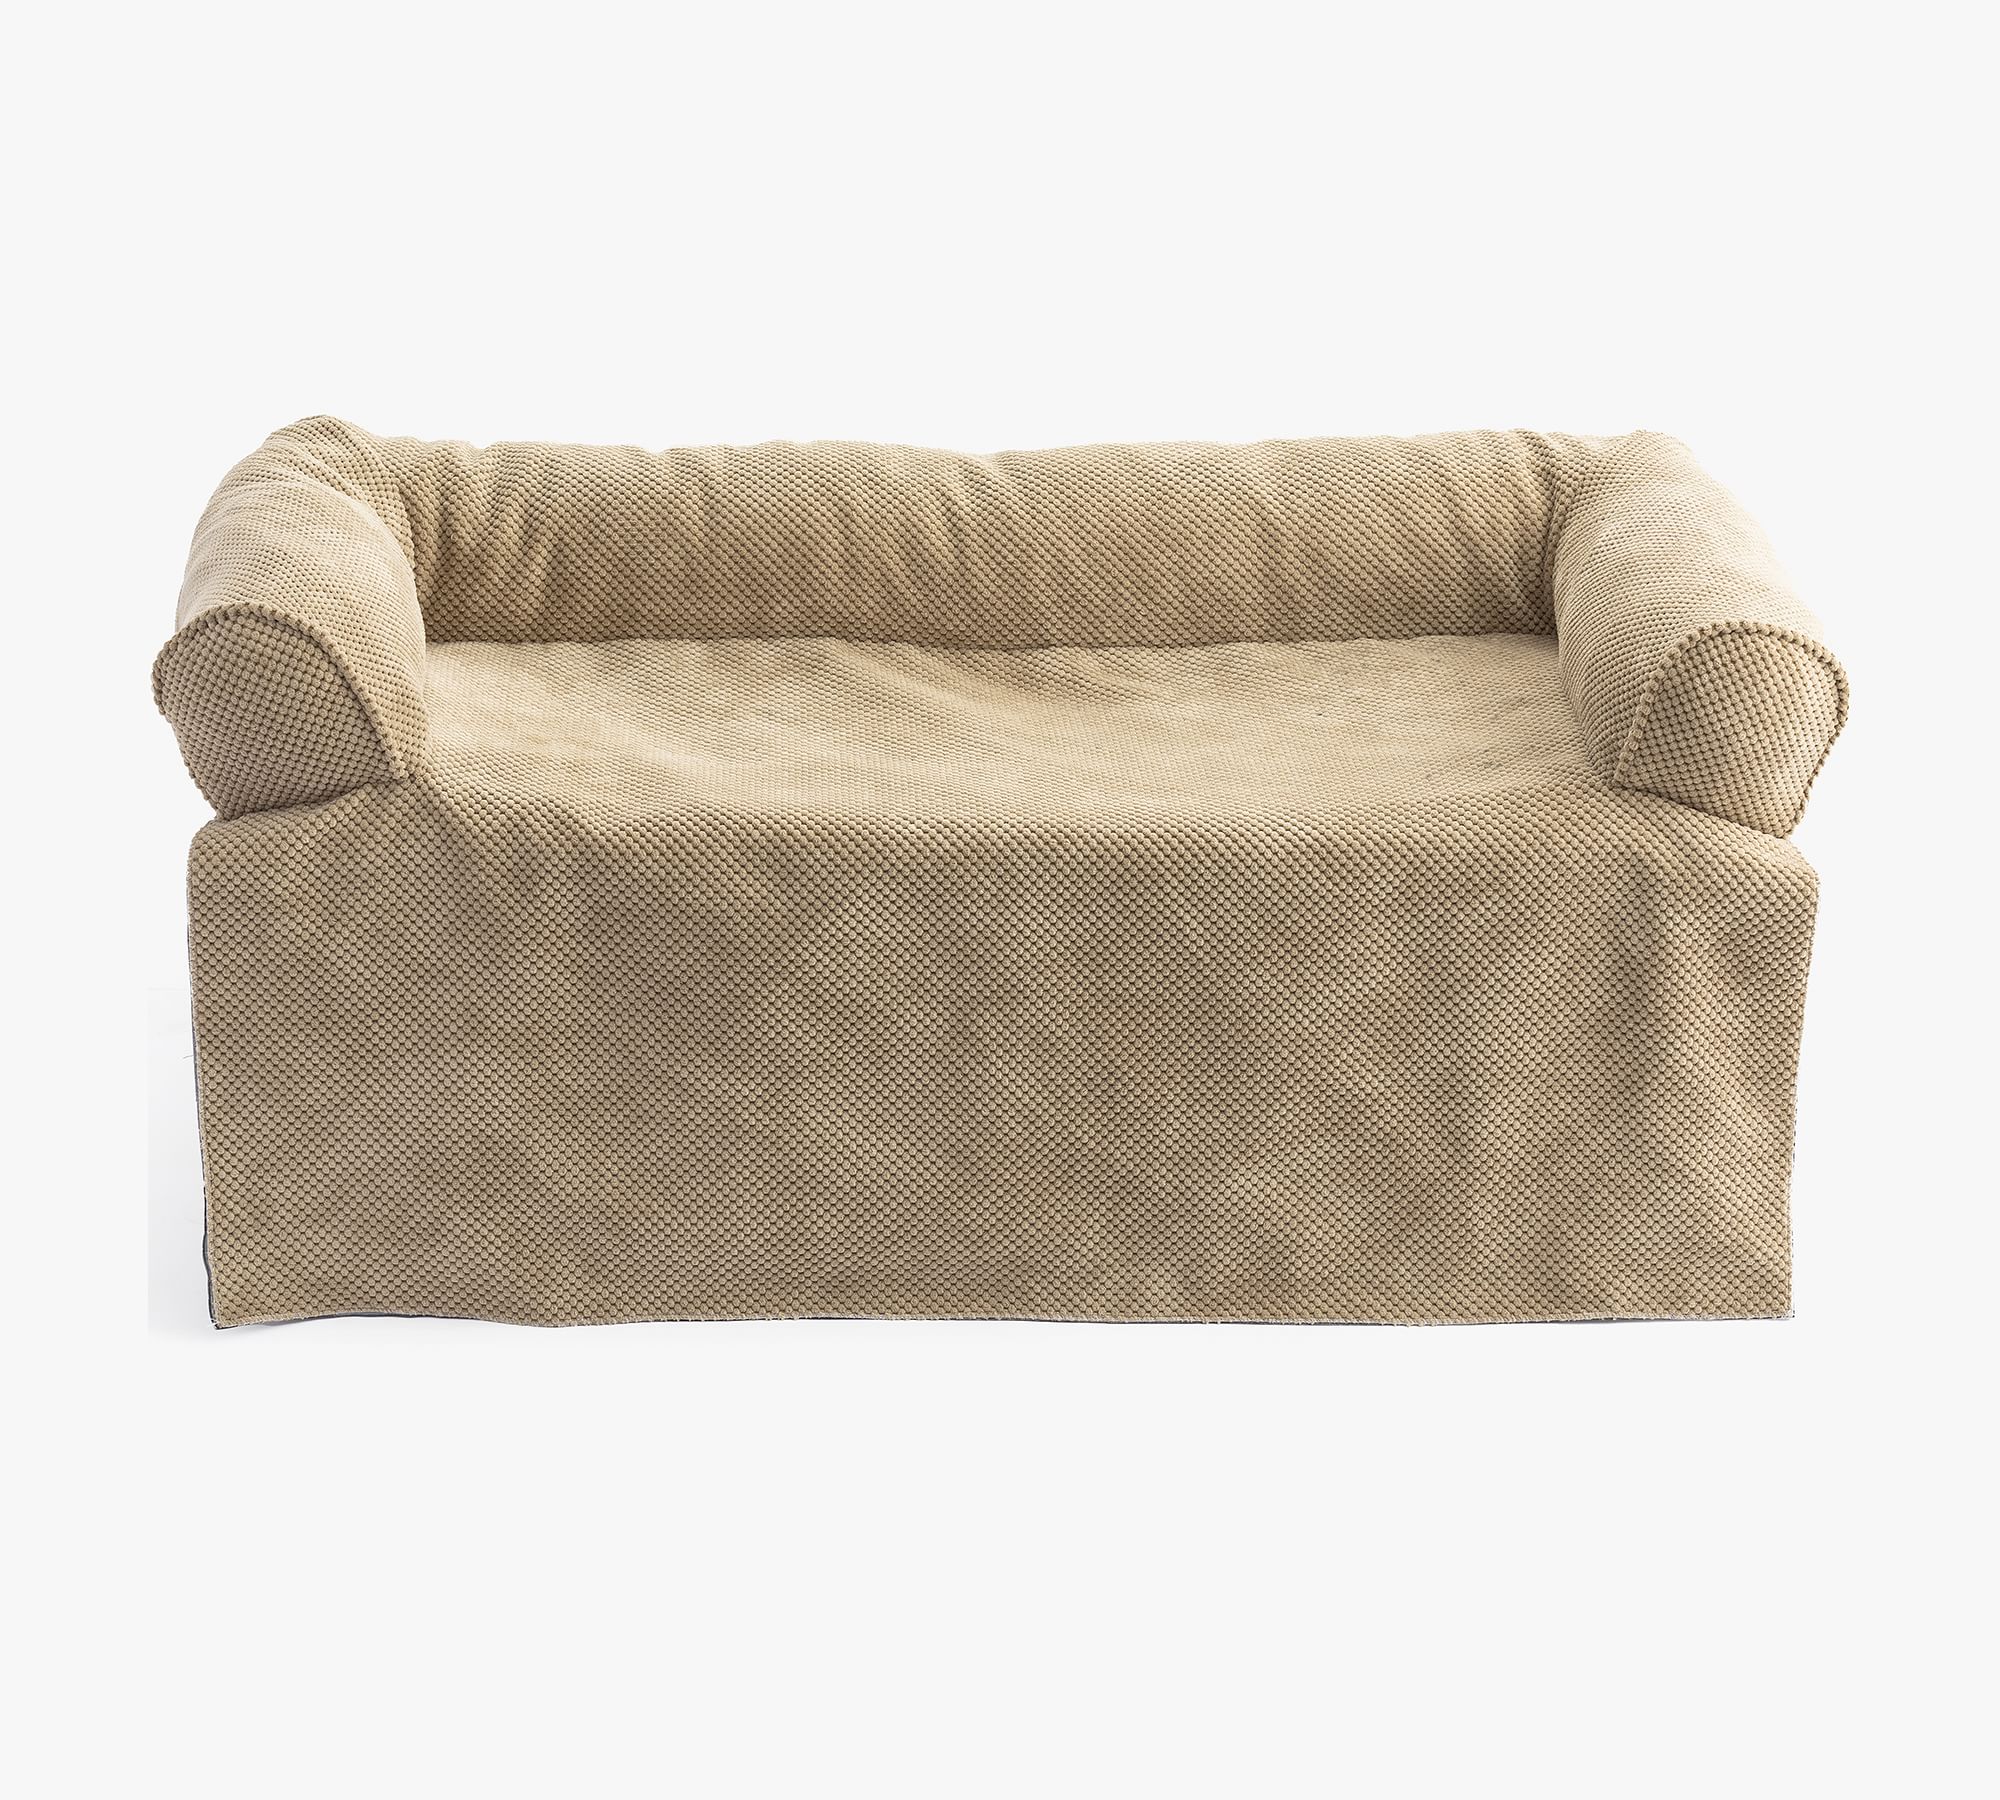 open-box-luxury-microsuede-pet-couch-cover-xl_1.jpg